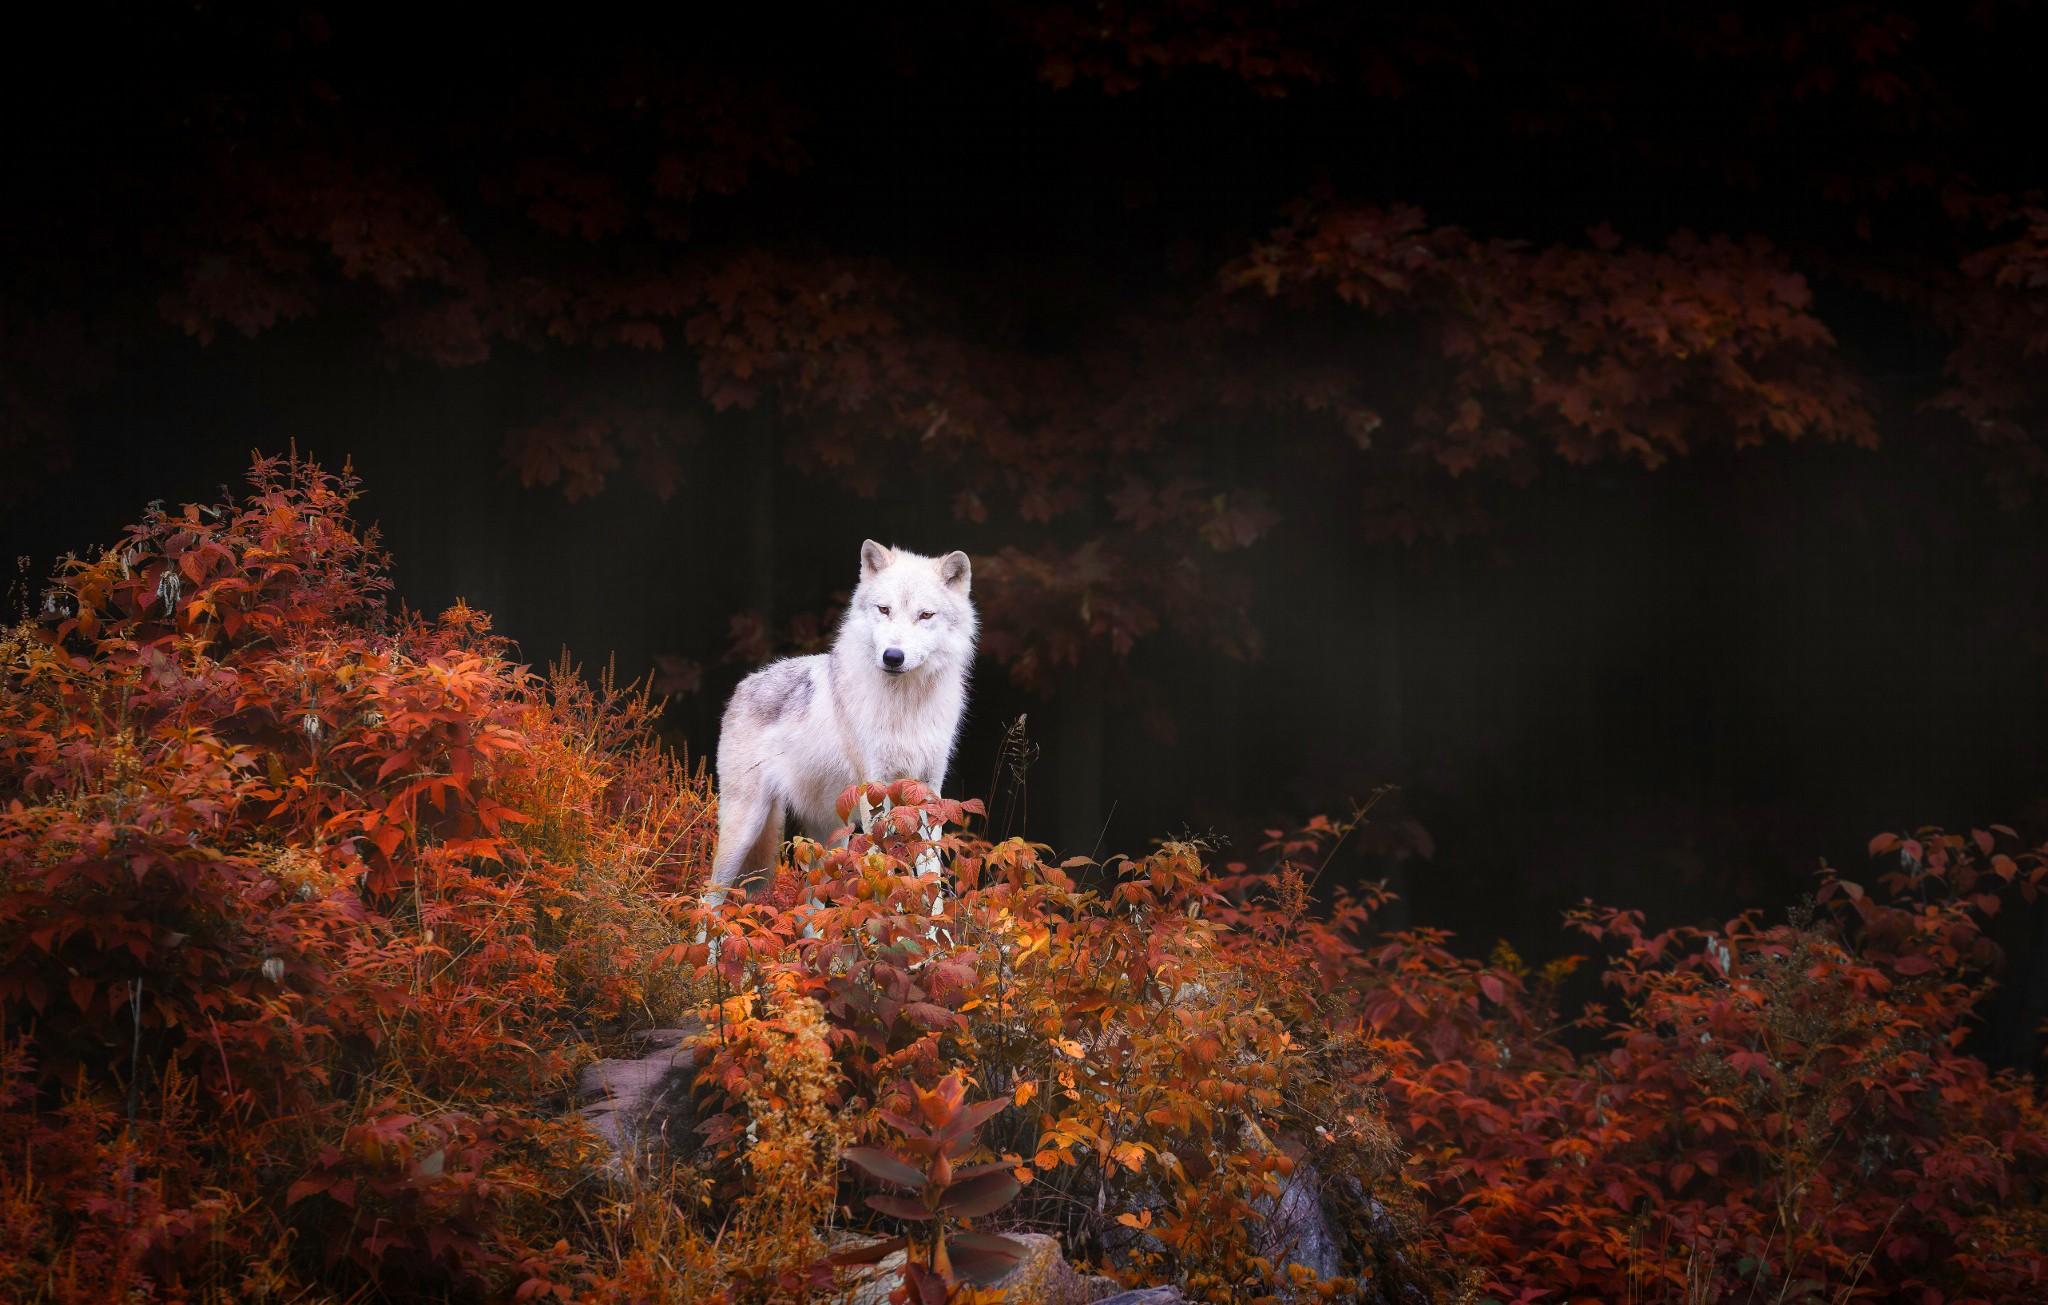 General 2048x1305 nature animals wolf trees forest leaves fall rocks